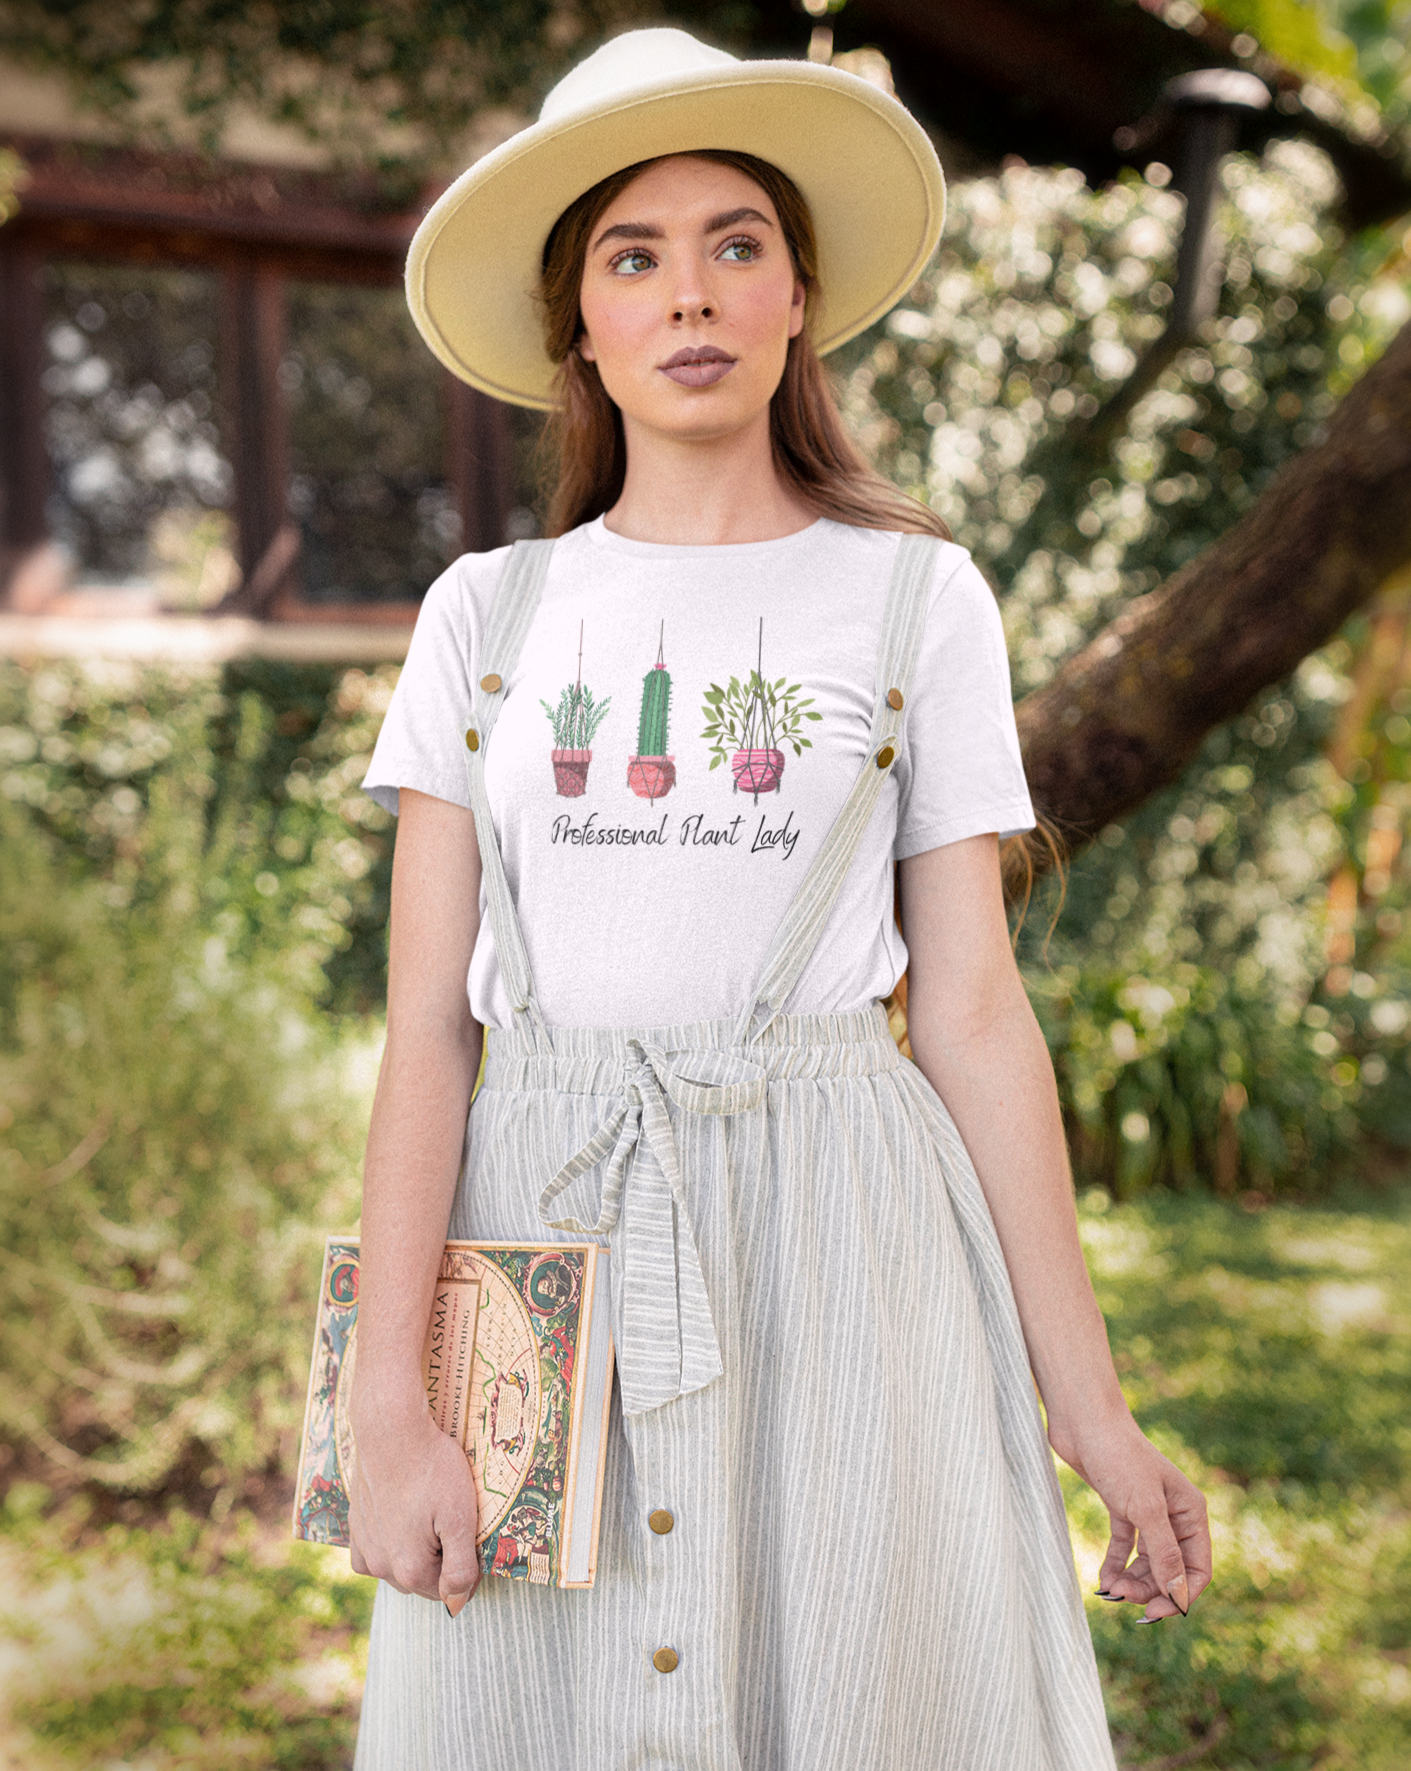 If you have kept your plants alive for more than a week, you are basically a professional.  This "Professional Plant Lady" cotton t-shirt is both stylish and funny.  Made with super soft cotton and is perfect for all day wear.  Upgrade your style today with this cute plant lover t-shirt.